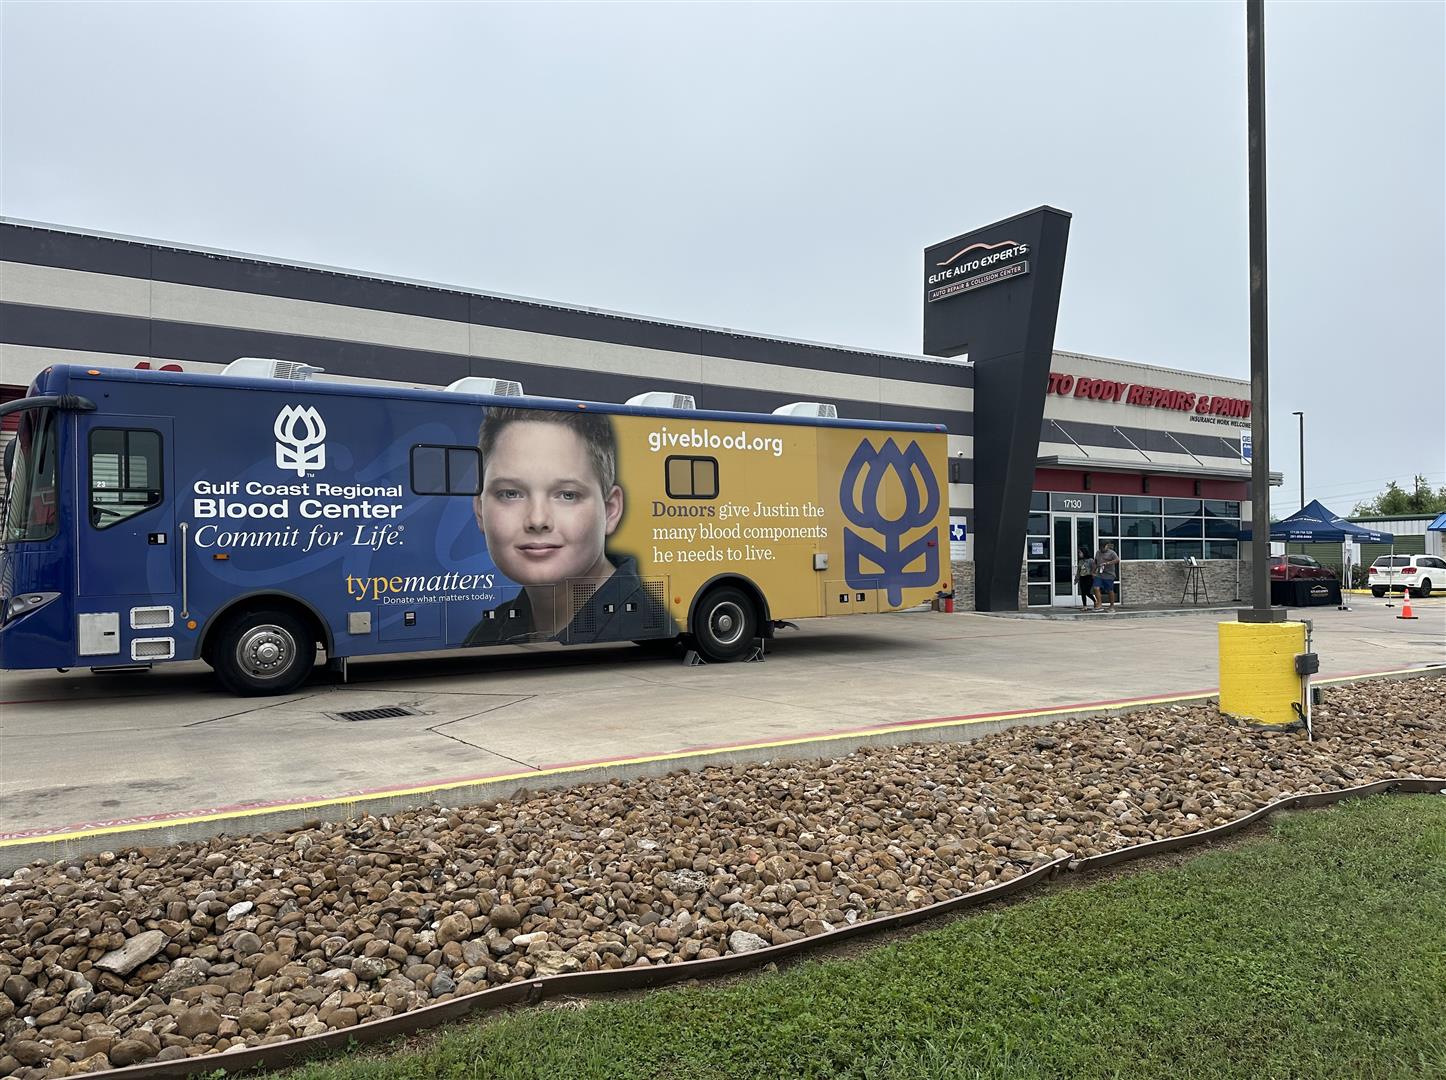 Elite Auto Experts Hosts Successful Blood Drive: Making a Positive Impact in Our Houston Community